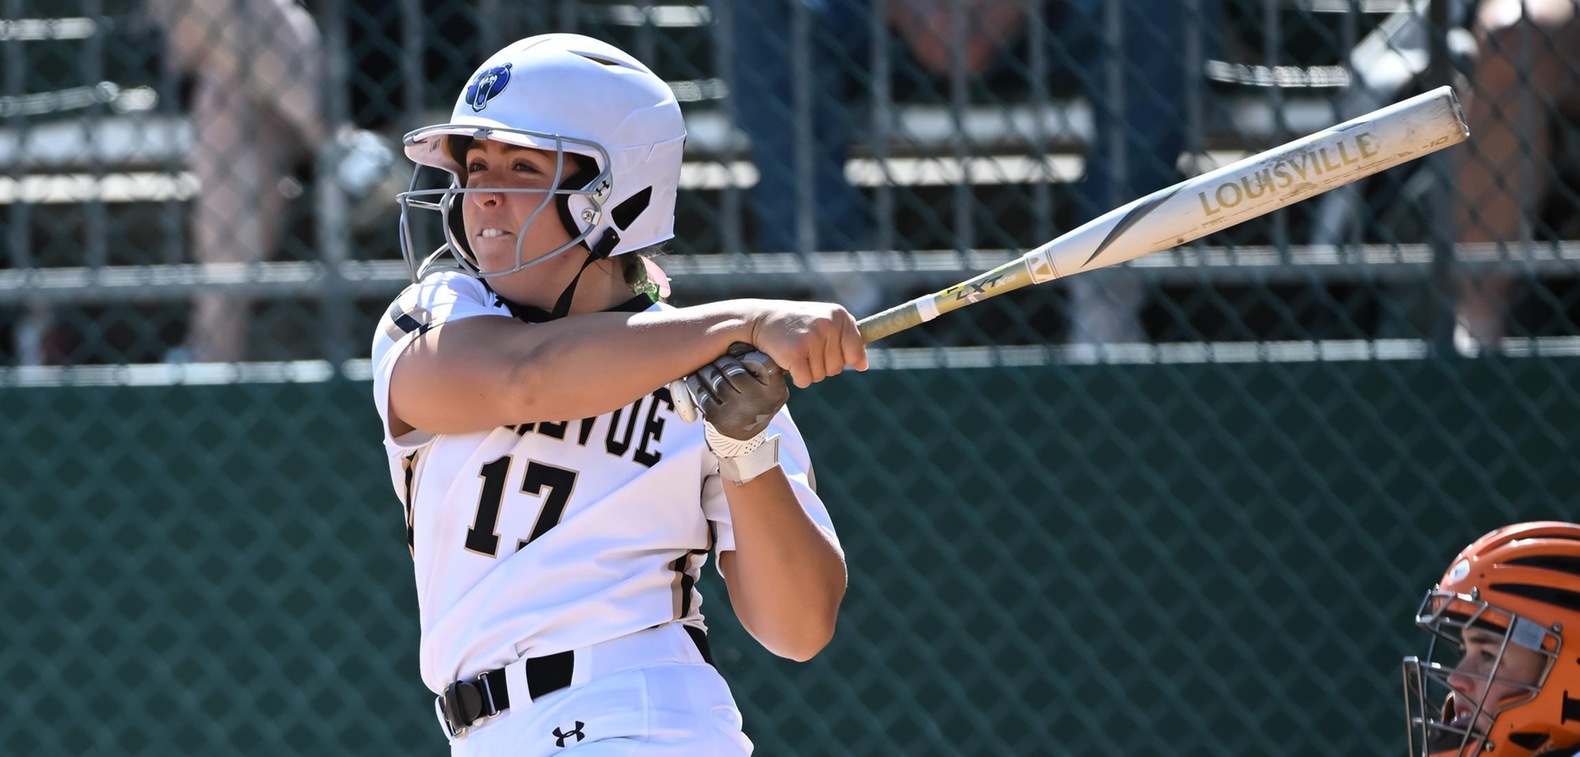 Lauren Jurek ended both games with extra-base hits in the sixth inning of each contest.